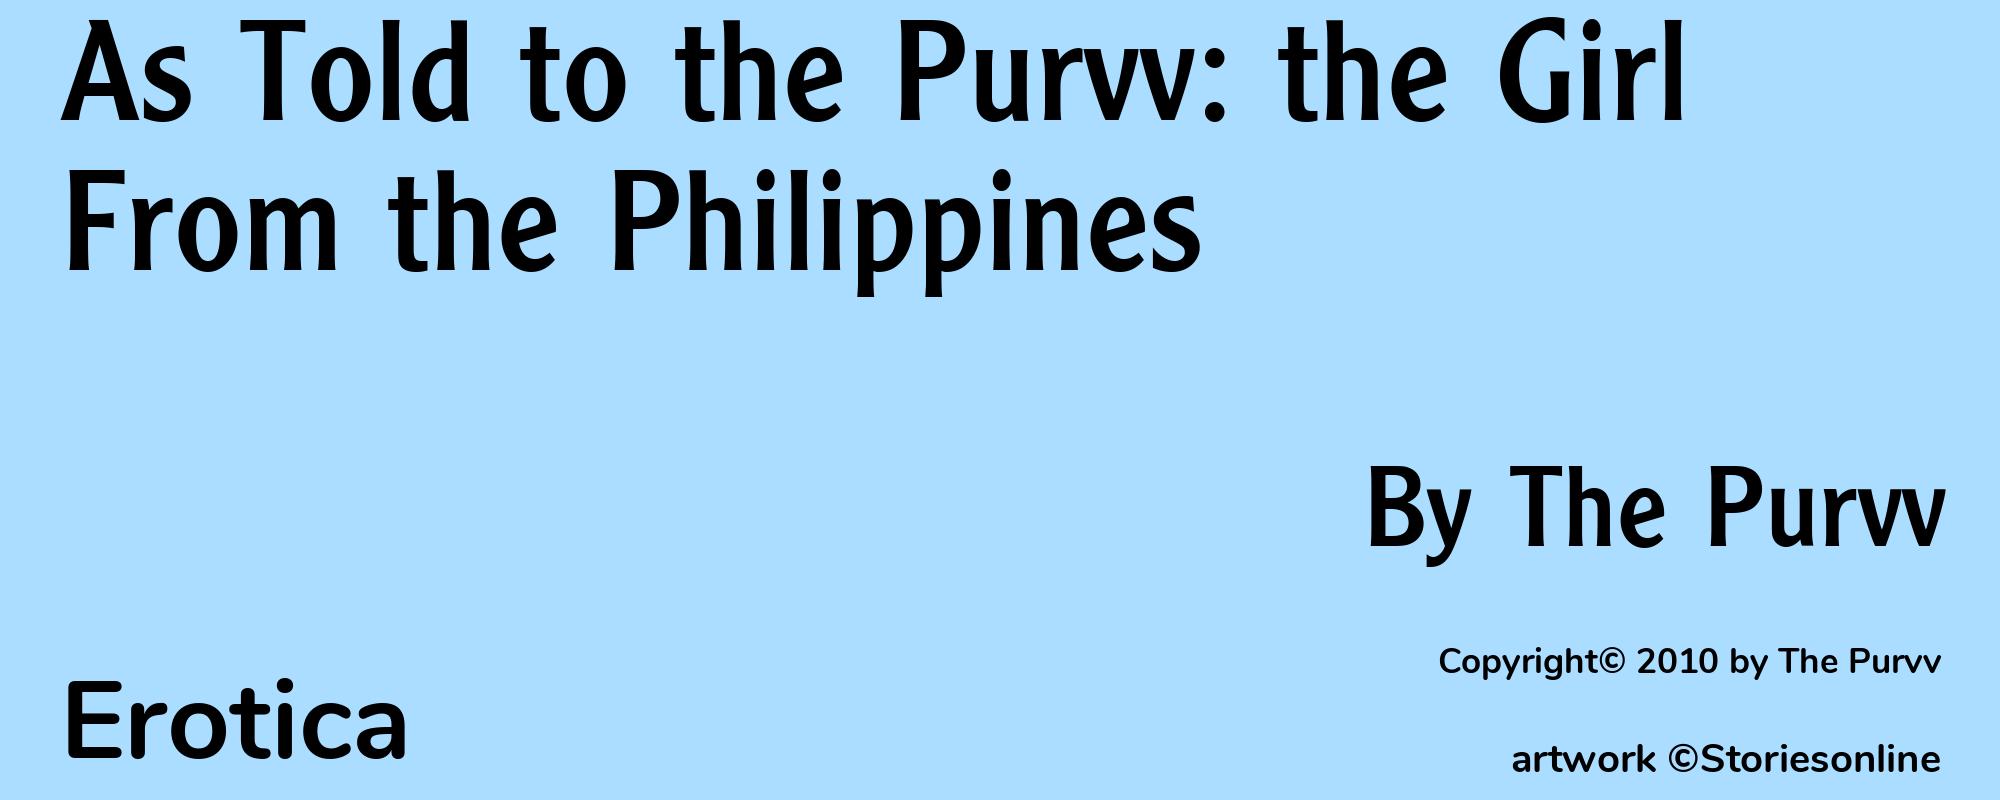 As Told to the Purvv: the Girl From the Philippines - Cover